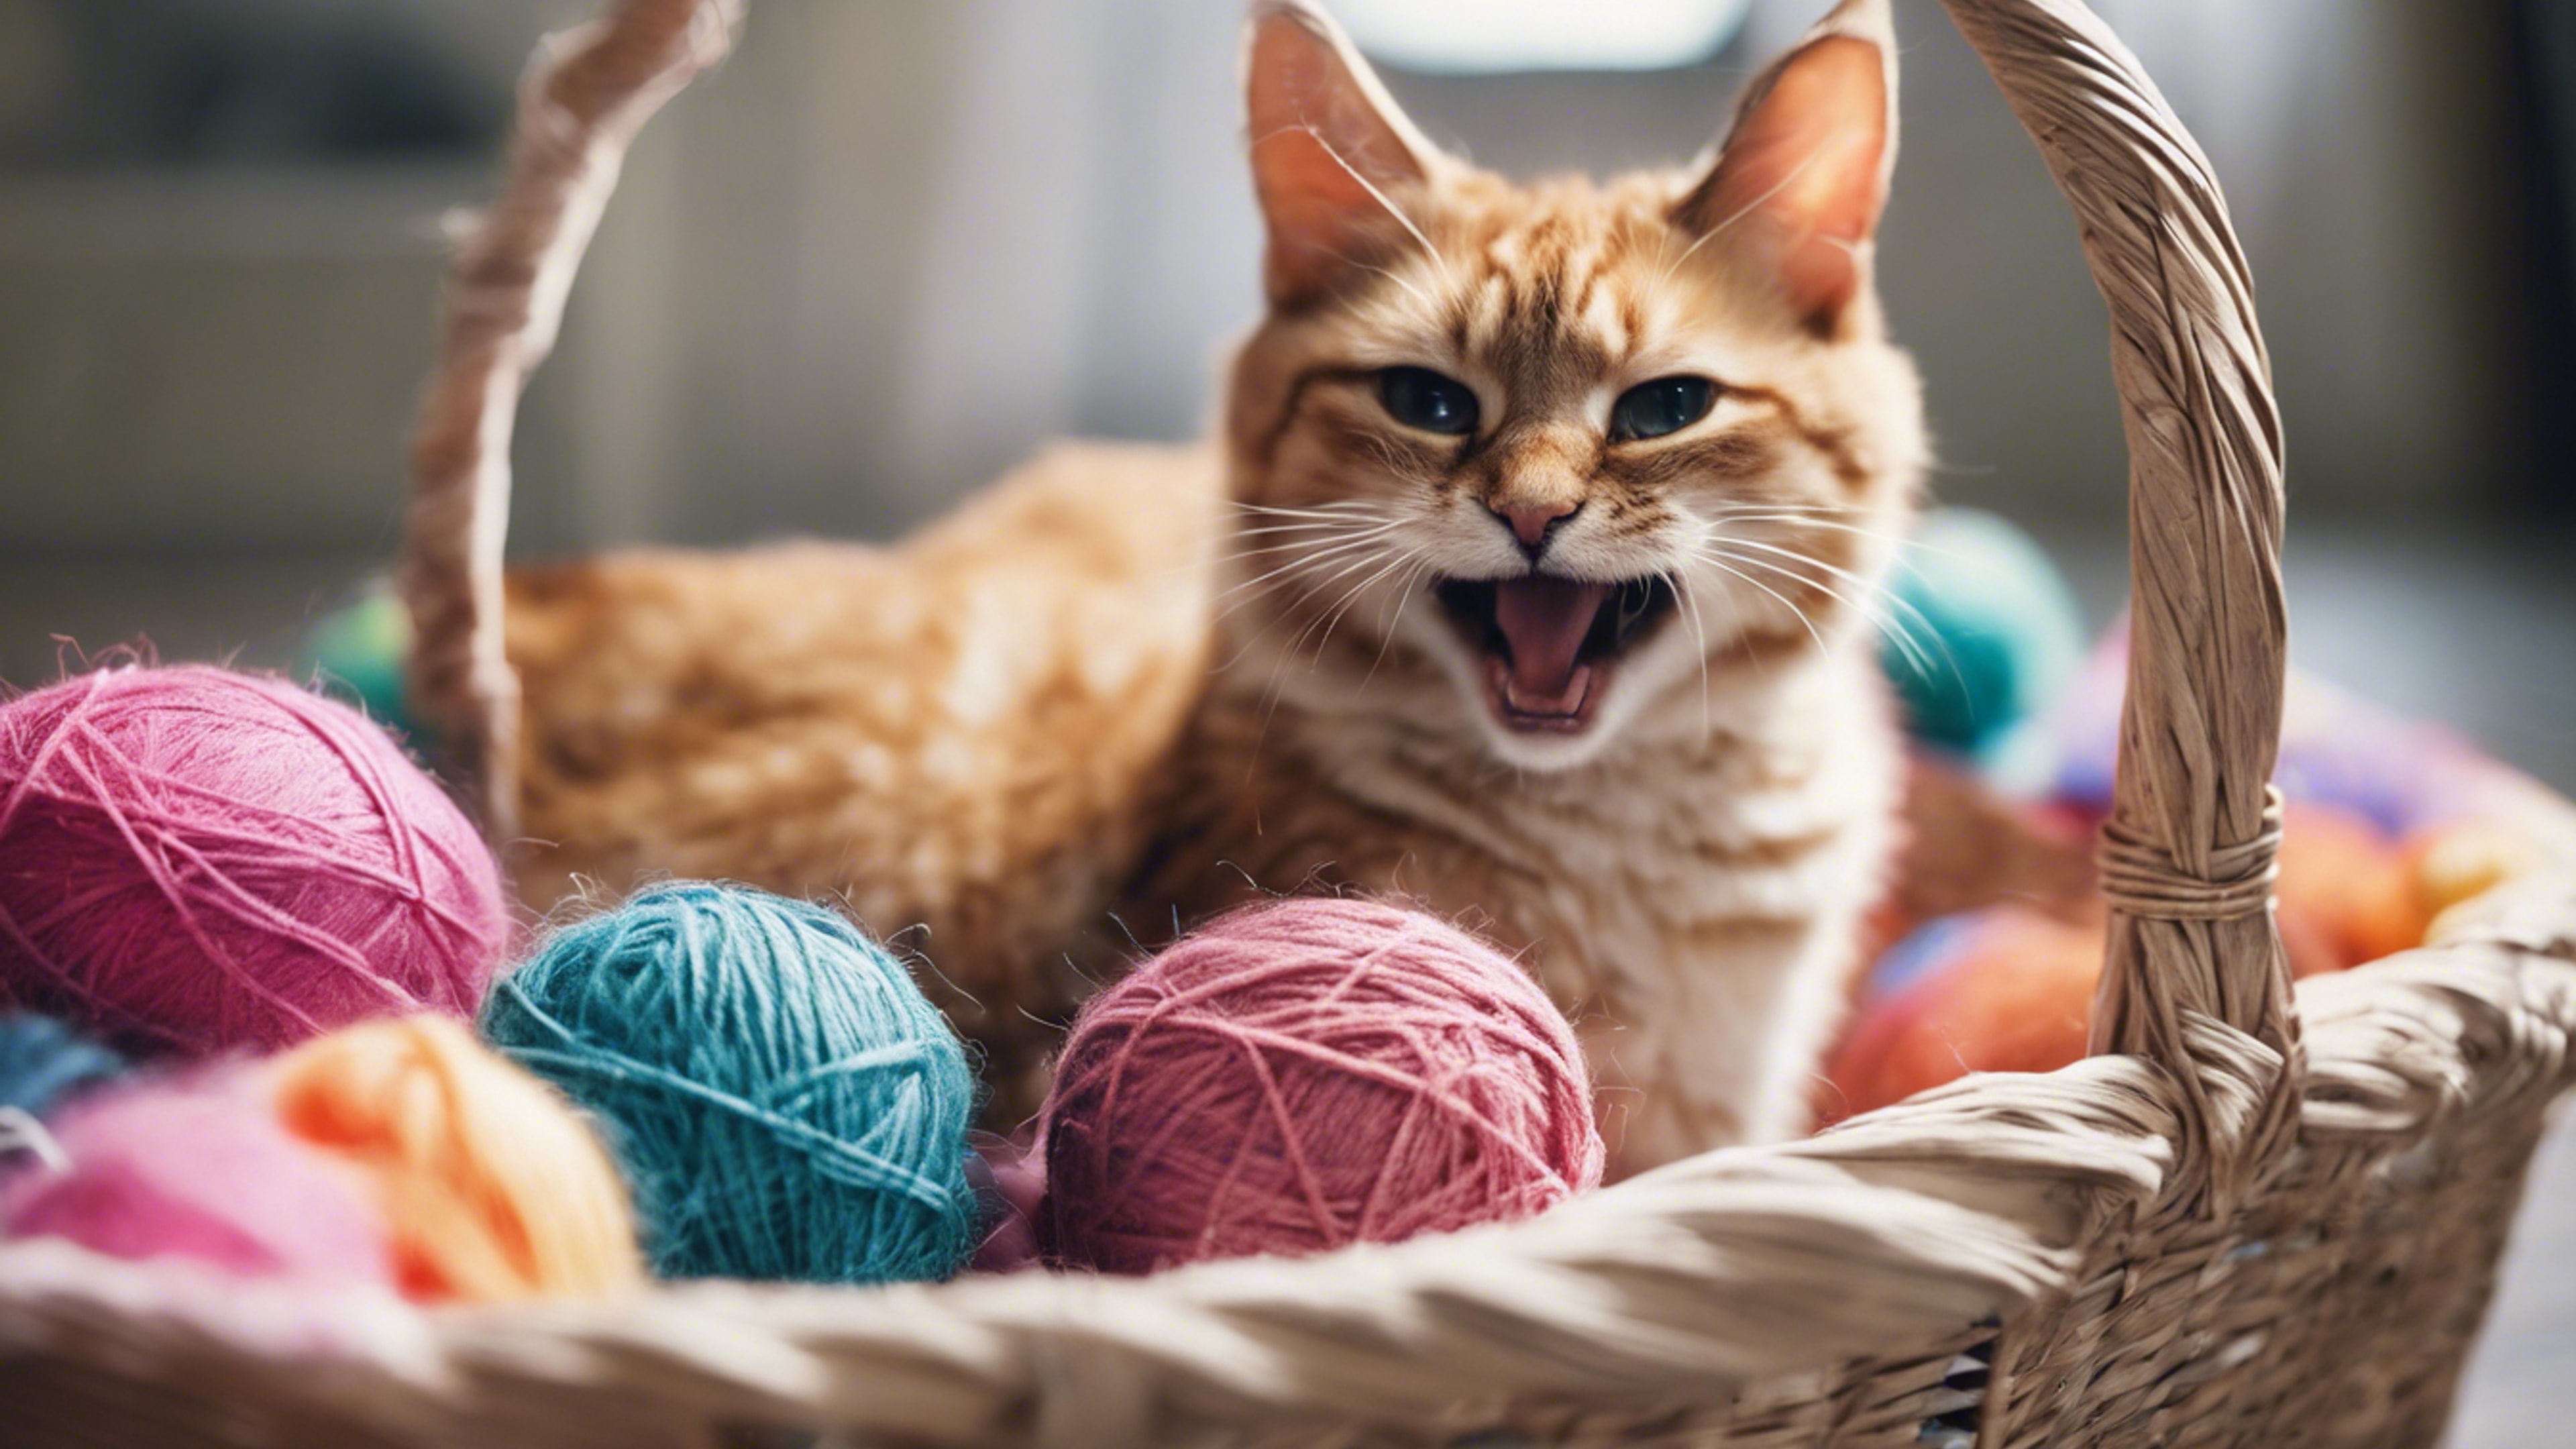 A cat mid-yawn in a basket filled with soft, colorful balls of yarn. Hintergrund[4de2b2f4a75d42f7bbf8]